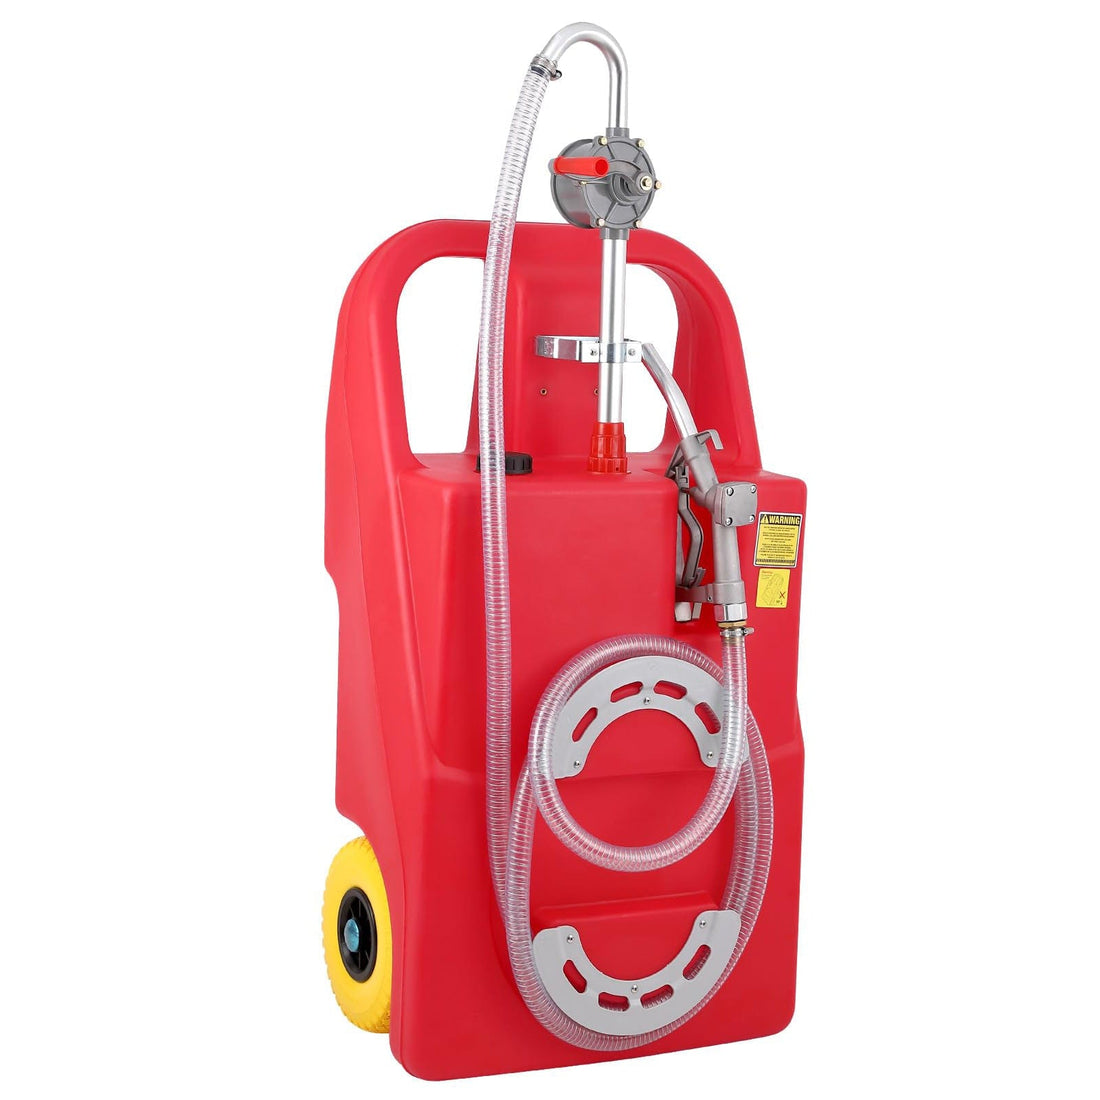 Fuel Caddy 32 Gallon Portable Fuel Tank On Wheels With Manual Fueling Nozzle 360° Swivel Connector